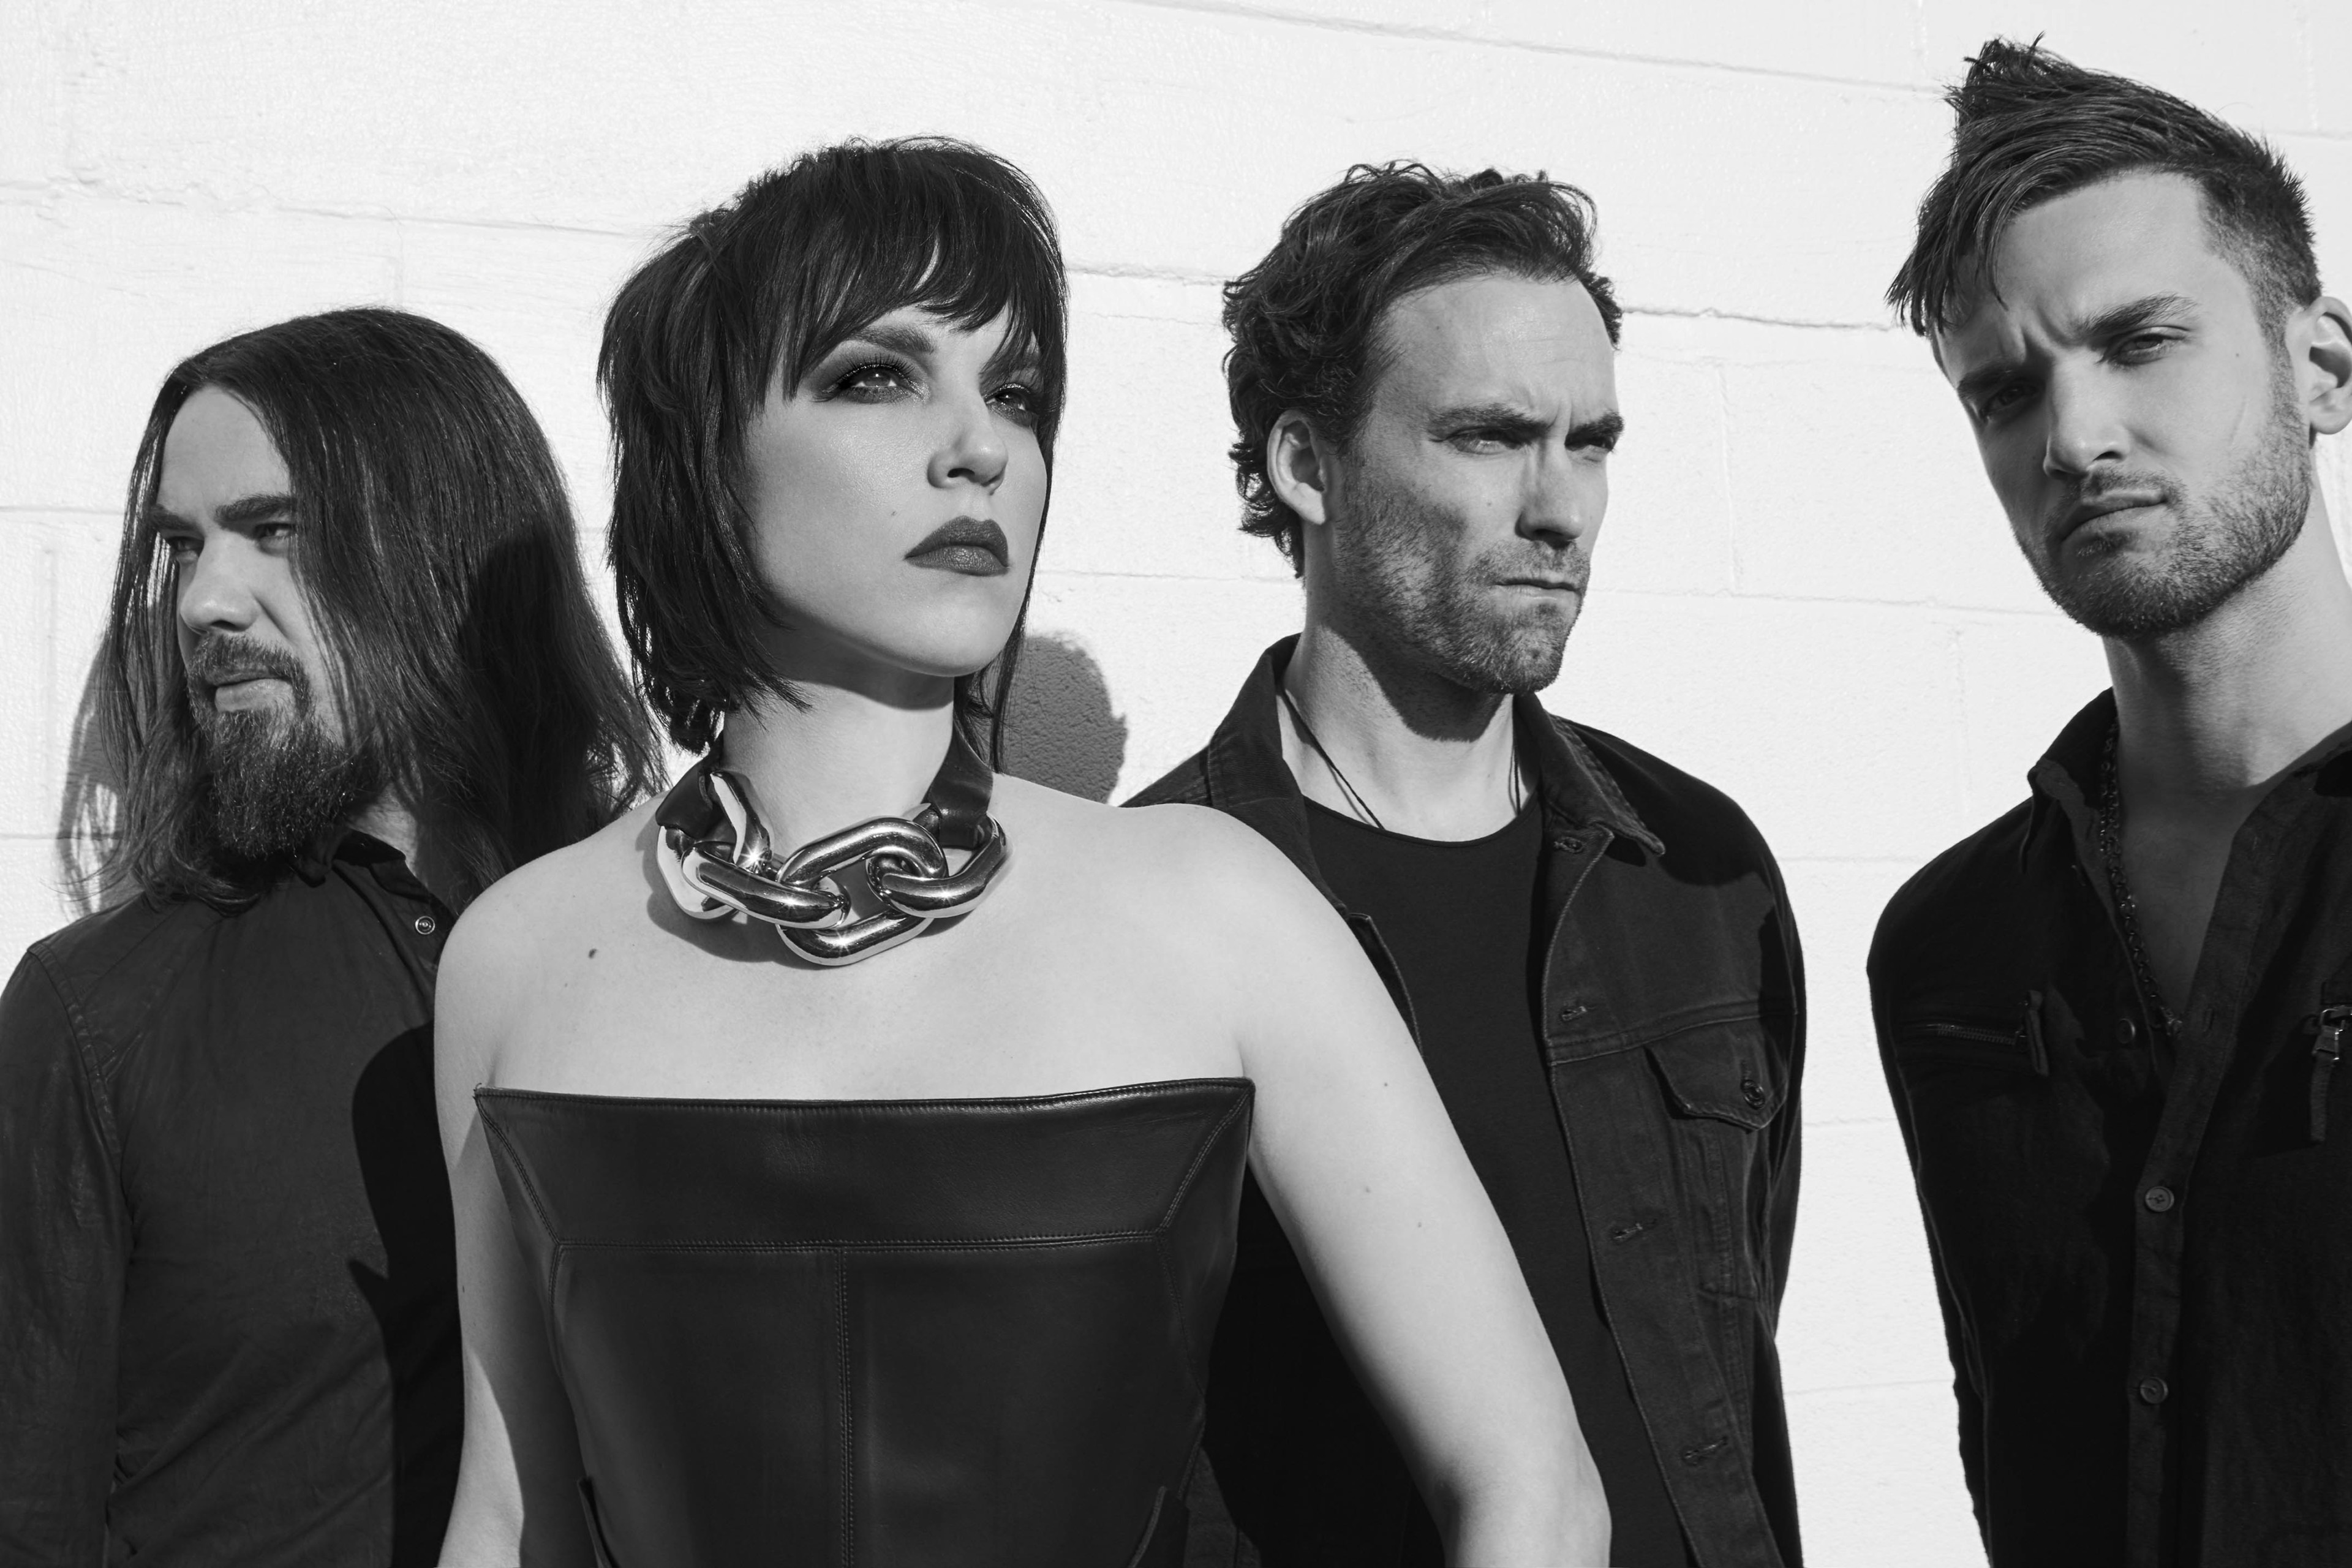 Halestorm Offers New Take On Fan Favorites, Collabs With Amy Lee for “Break In” on Reimagined EP